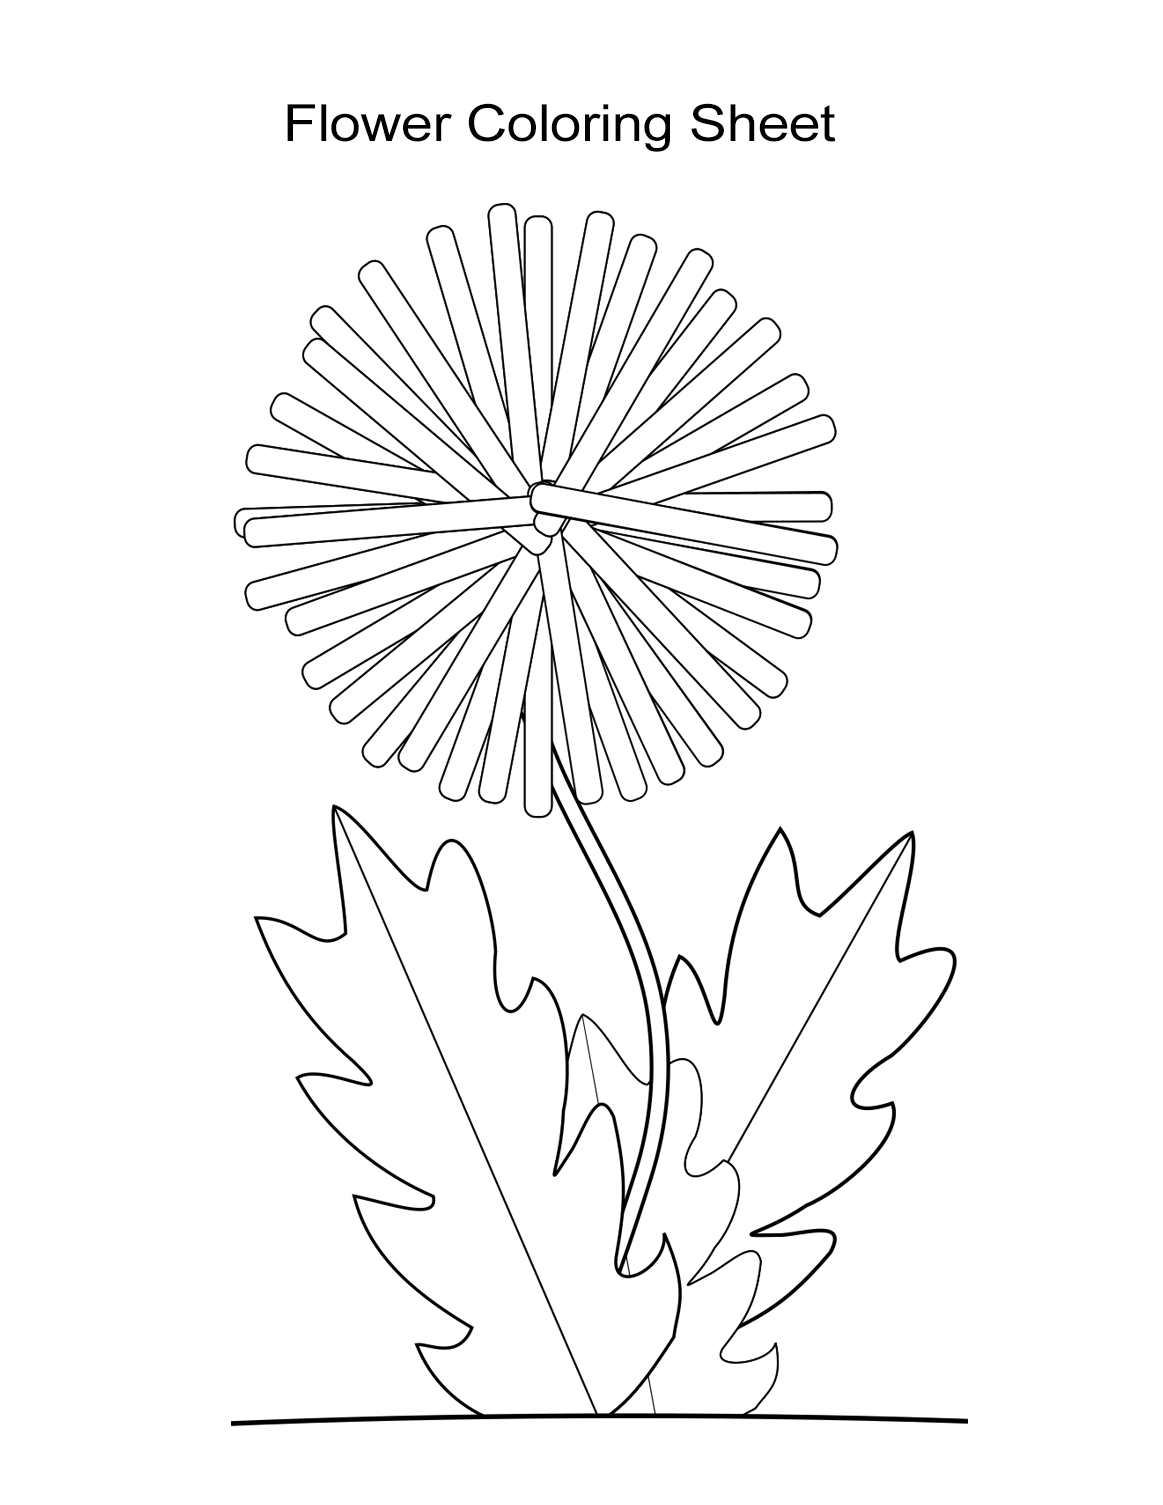 Flower coloring sheets for girls and boys